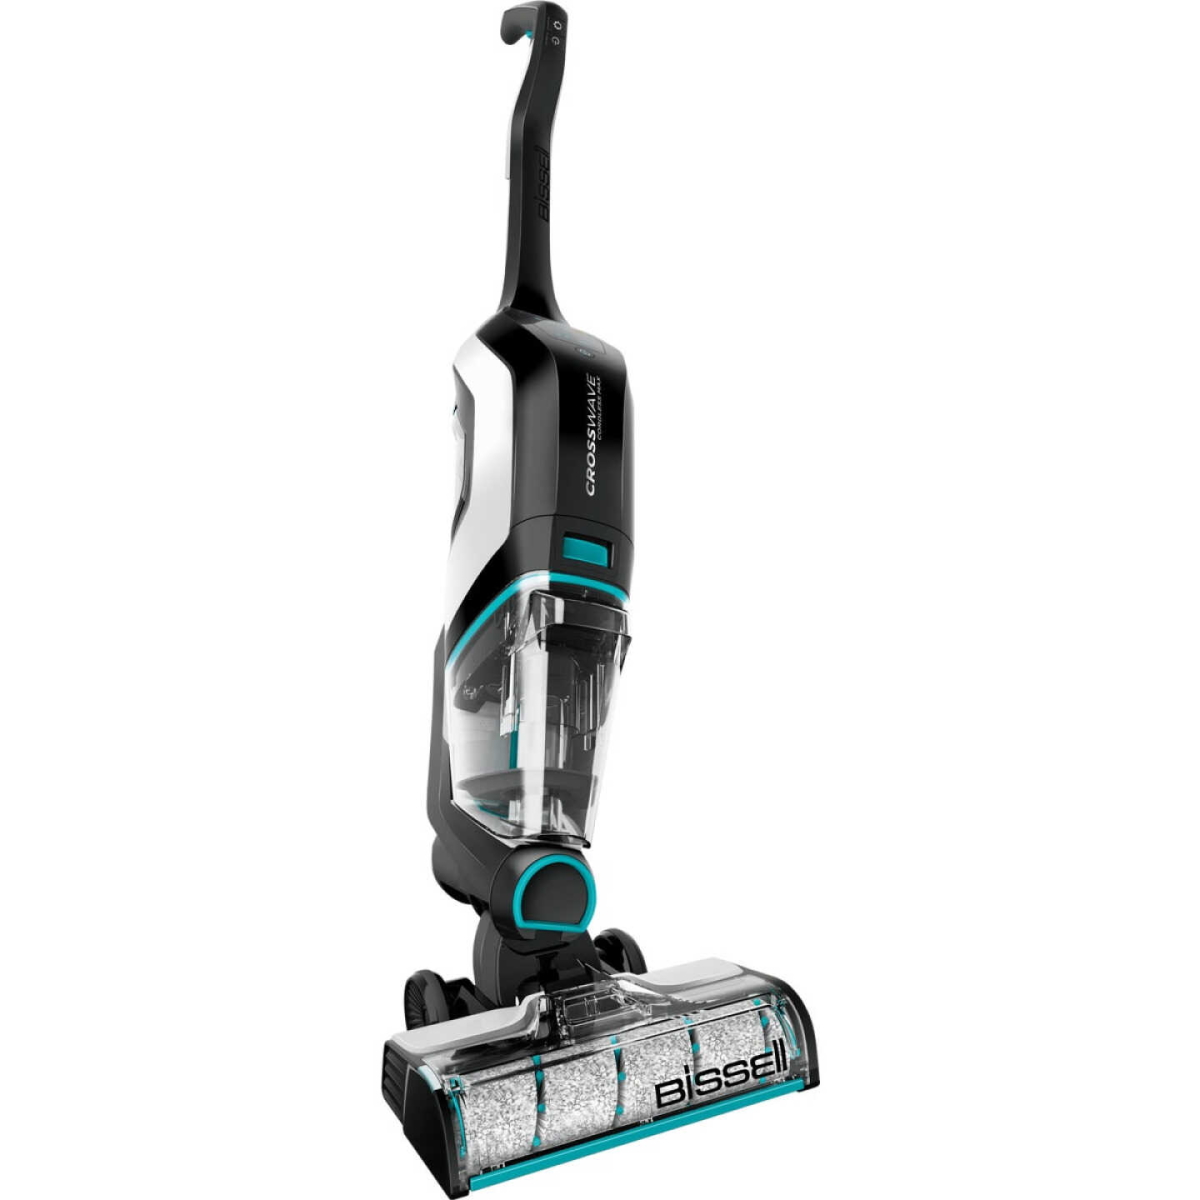 https://www.berings.com/wp-content/uploads/2023/03/Bissell-Crosswave-Cordless-Max-Multi-Surface-Wet-Dry-Vac.jpg